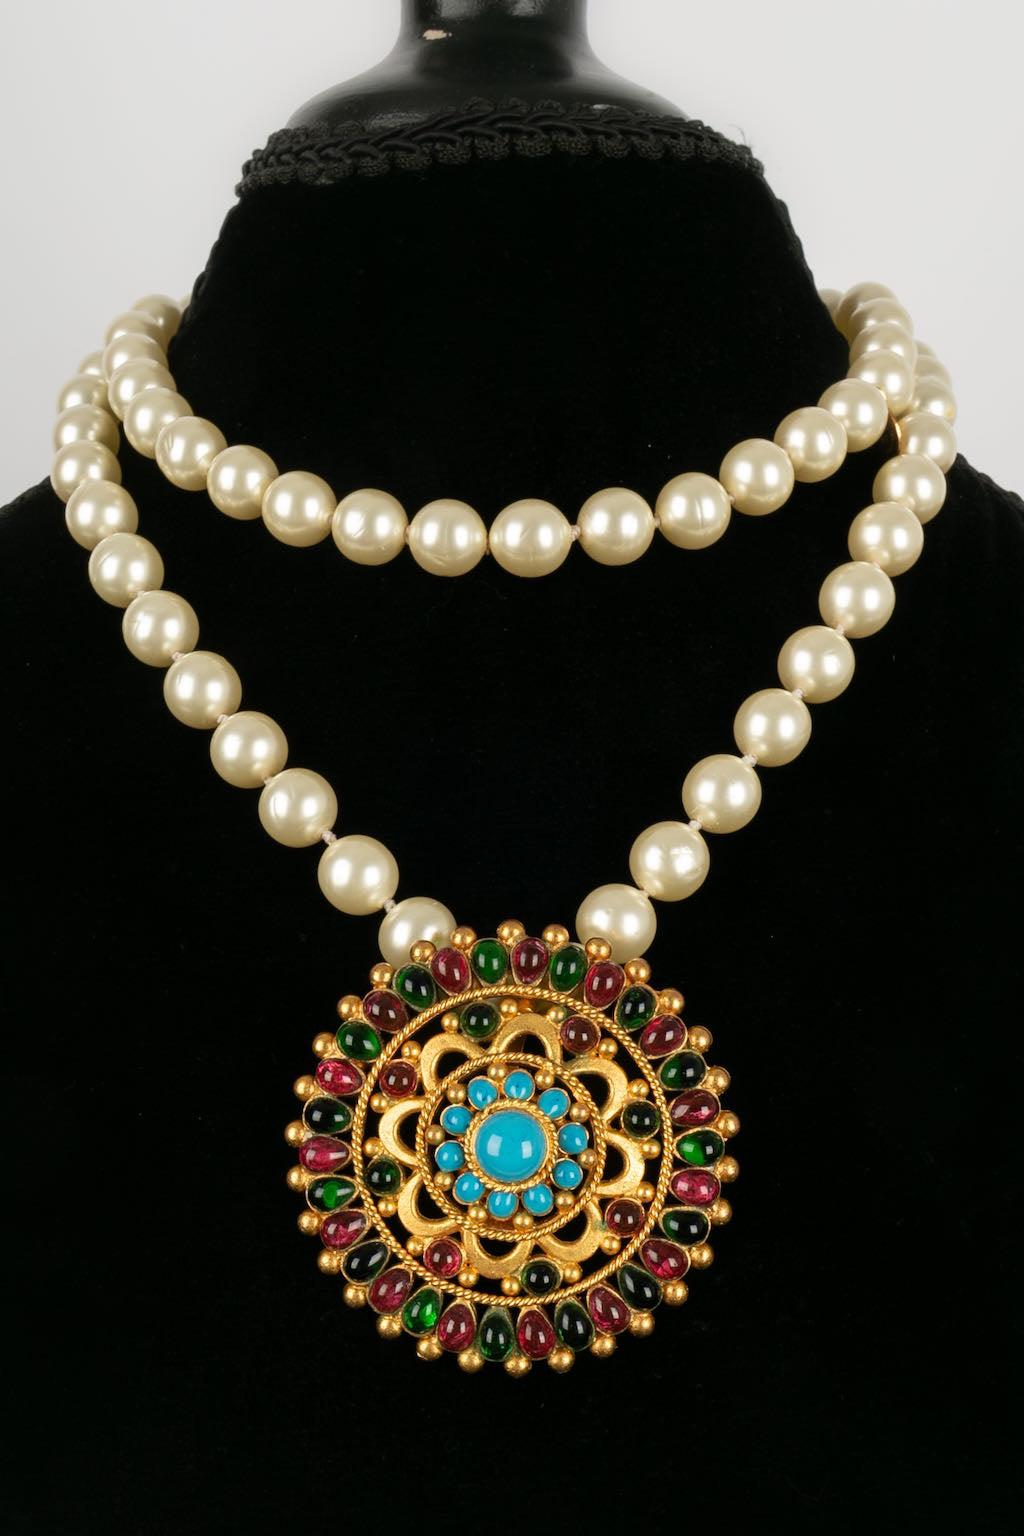 Women's Chanel Necklace in Pearls with Brooch For Sale